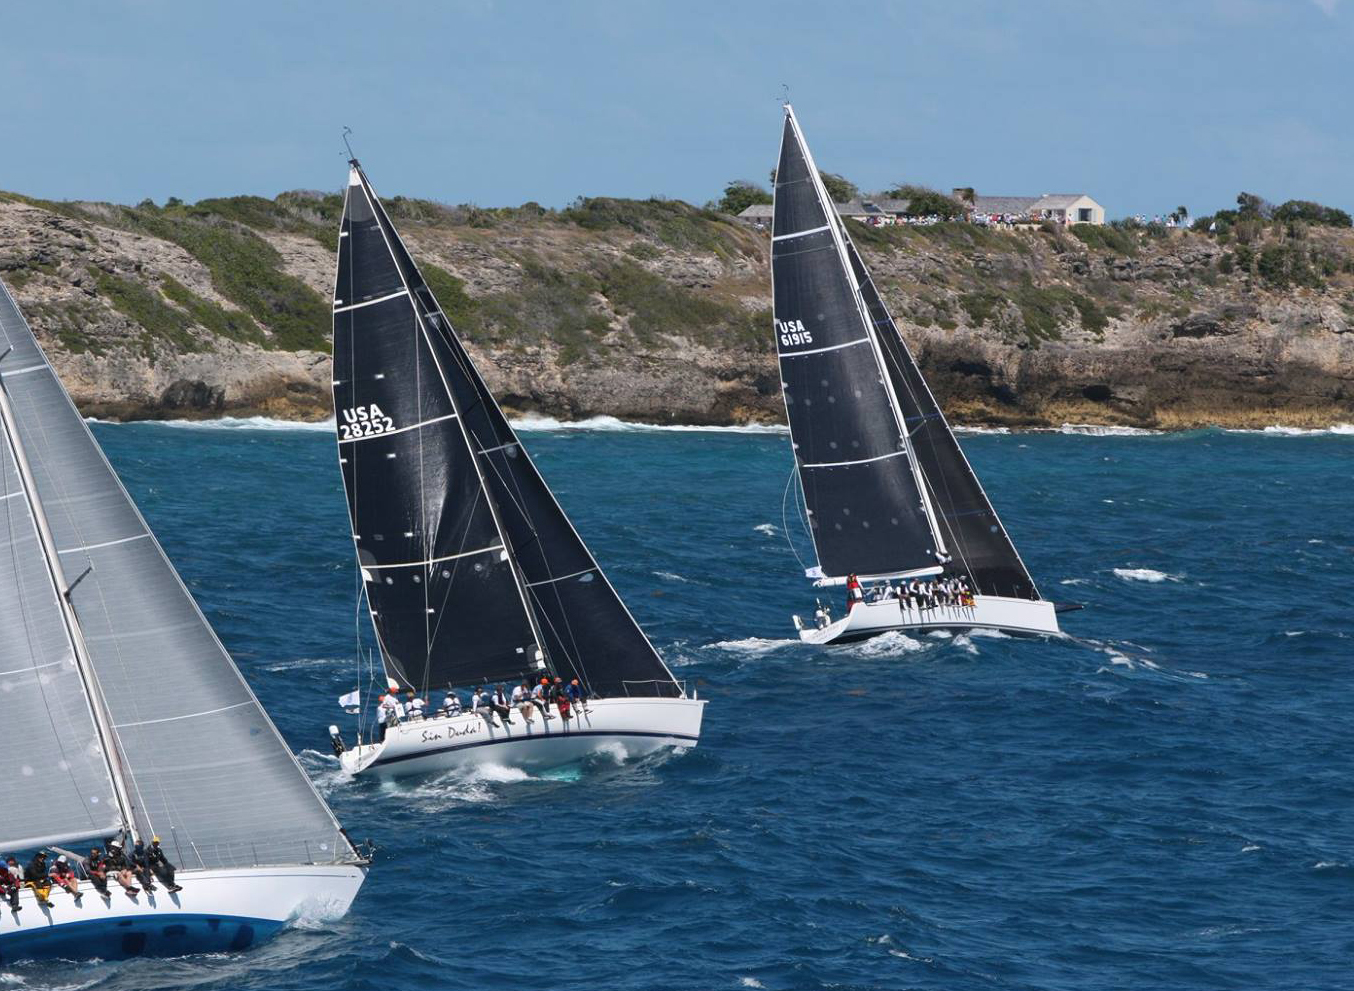 The Marten 49 SUMMER STORM just head of the Santa Cruz 52 SIN DUDA! just after the start of the 2019 Caribbean 600.